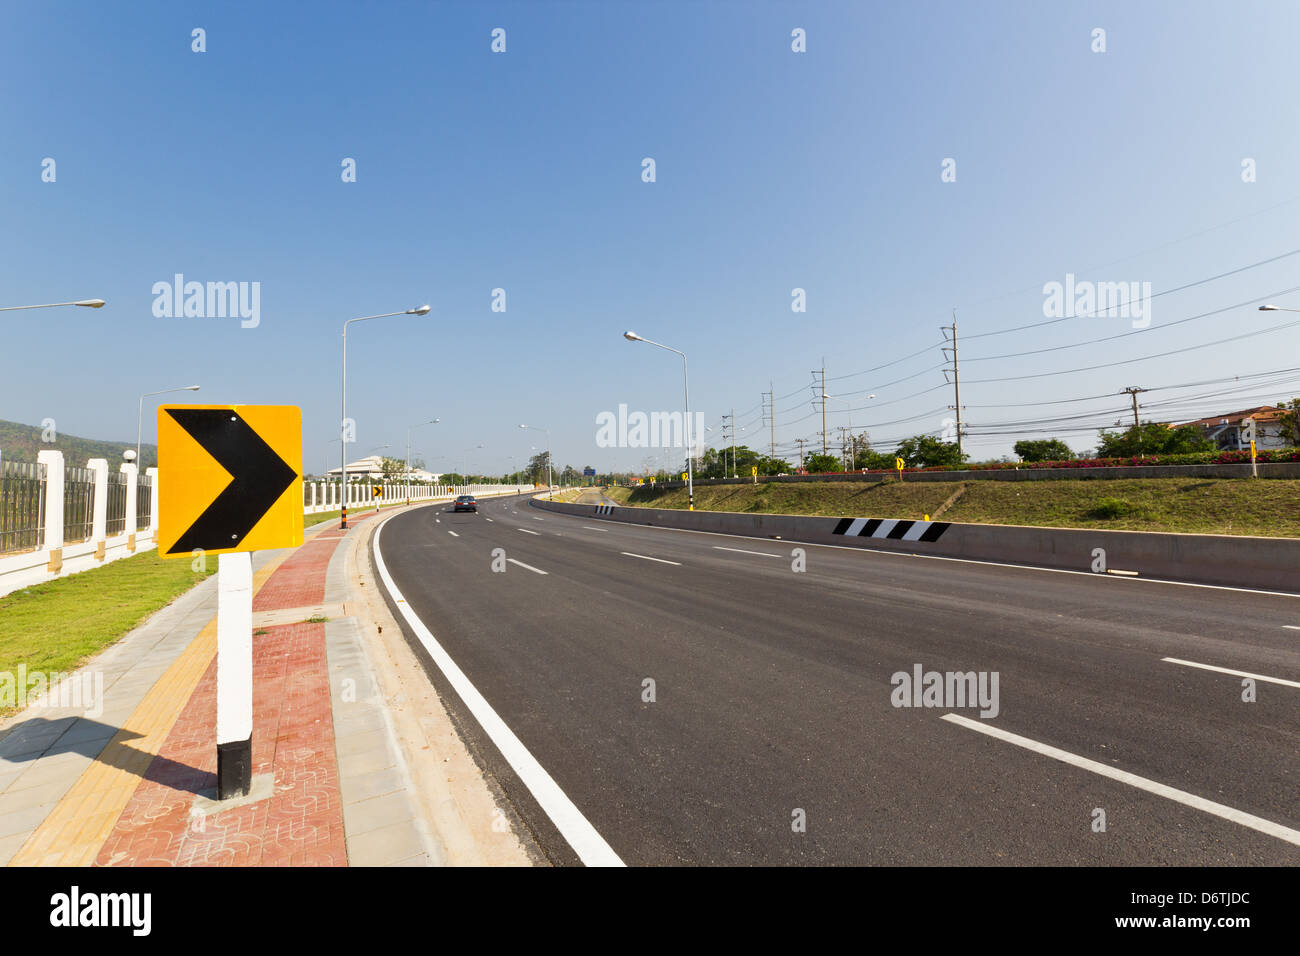 Road Sign warns Drivers to Beware Ahead Dangerous Curve. Stock Photo